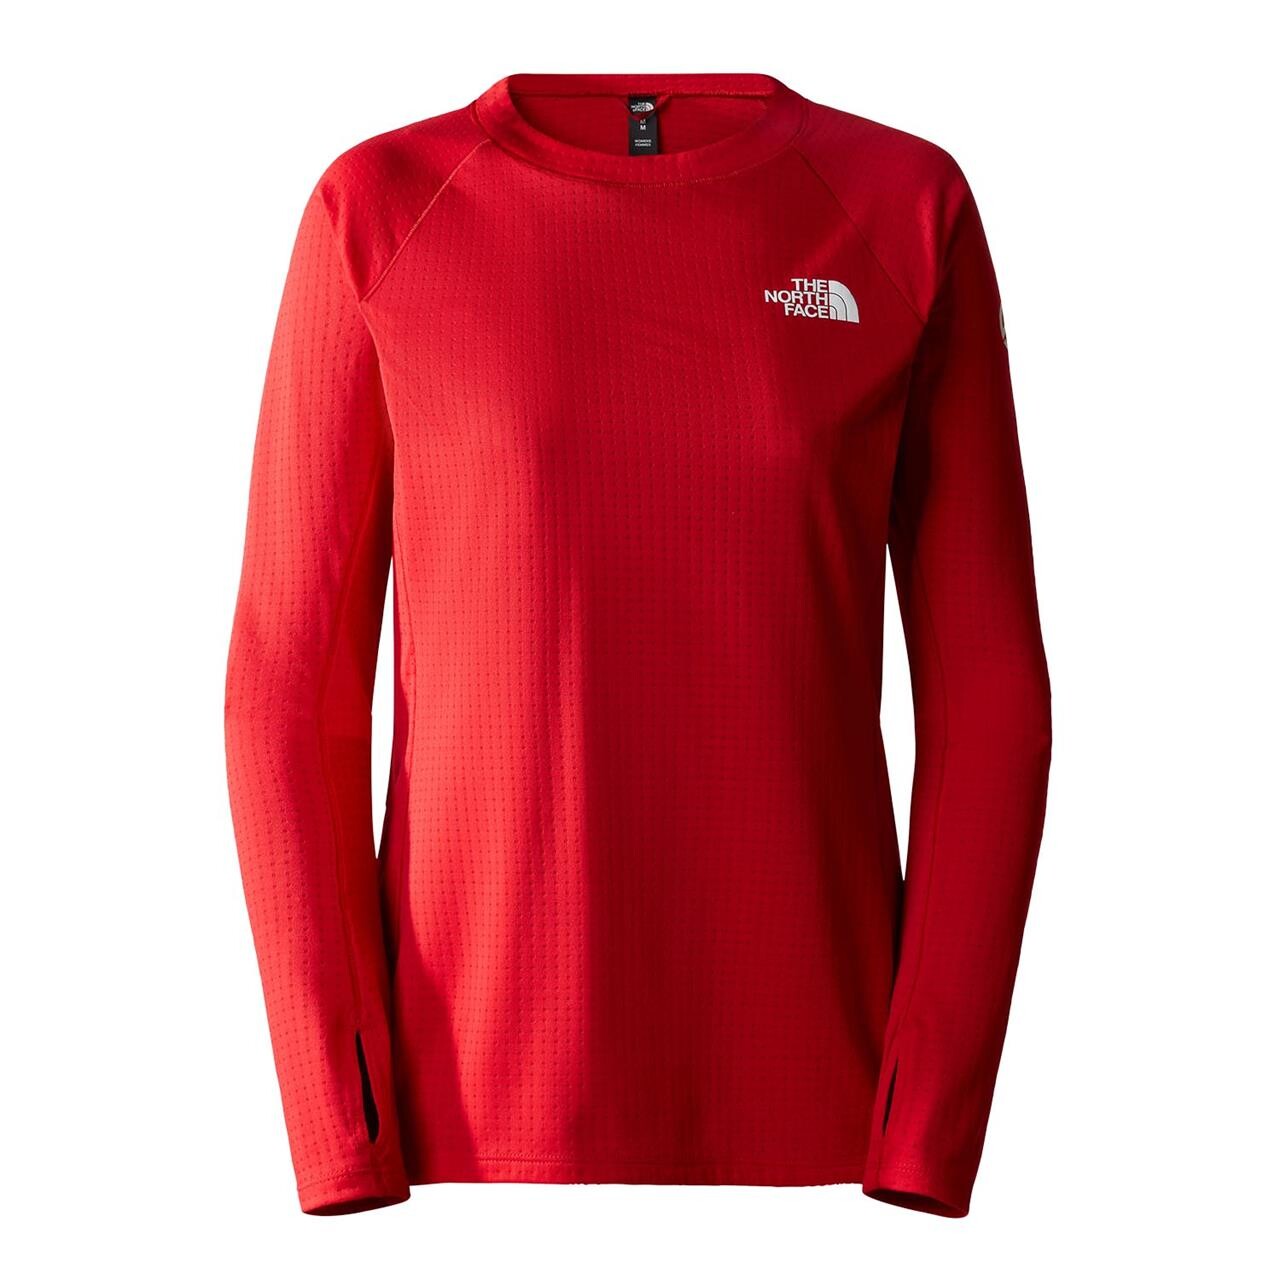 Se The North Face Womens Summit Pro 120 Crew (Rød (TNF RED) Small) hos Friluftsland.dk